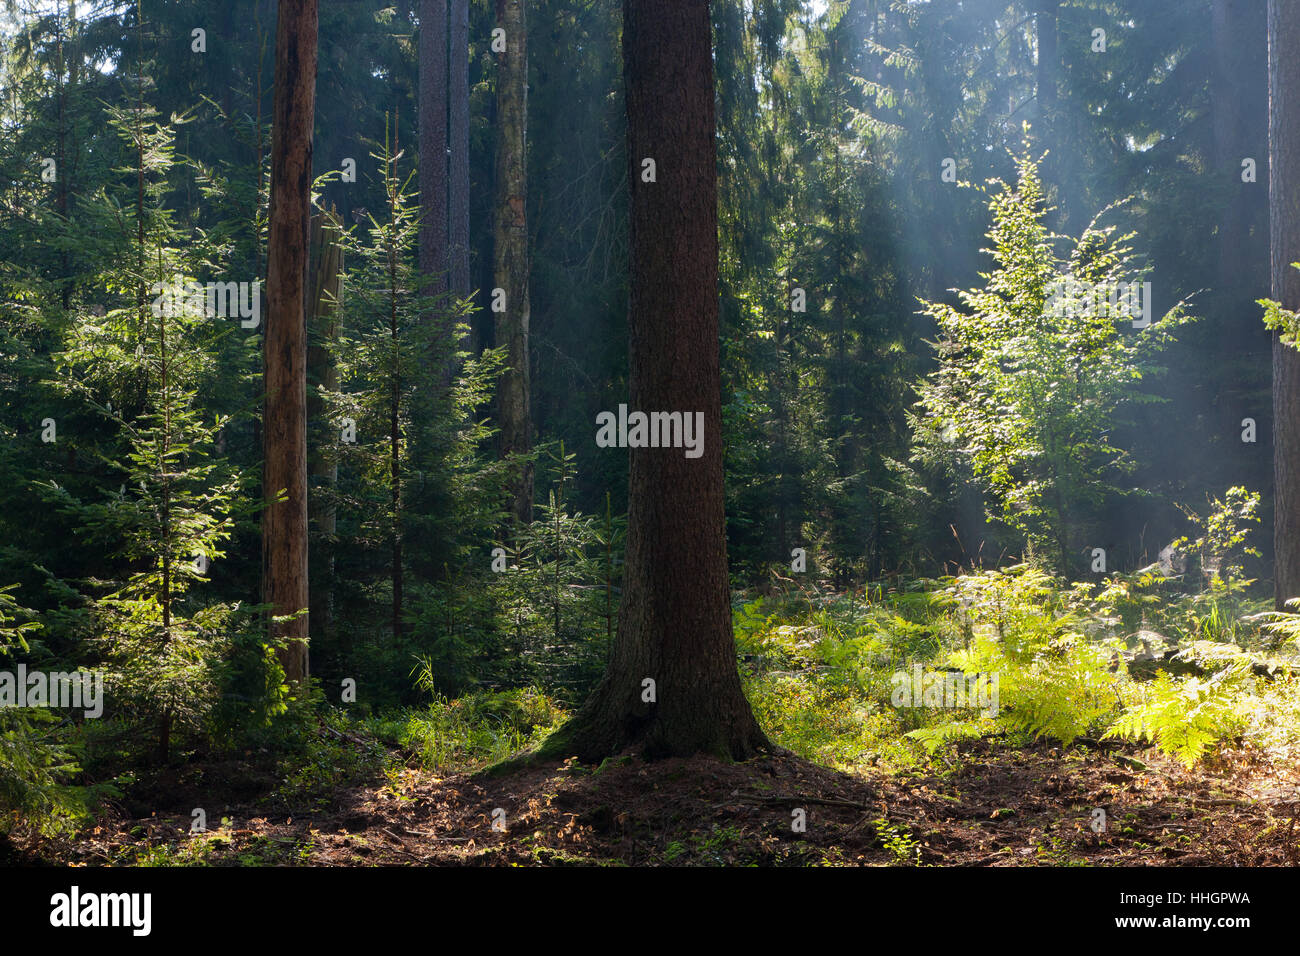 sunrise, morning, dark, shady, primeval, forest, tomorrow, stand, trunk, pine, Stock Photo